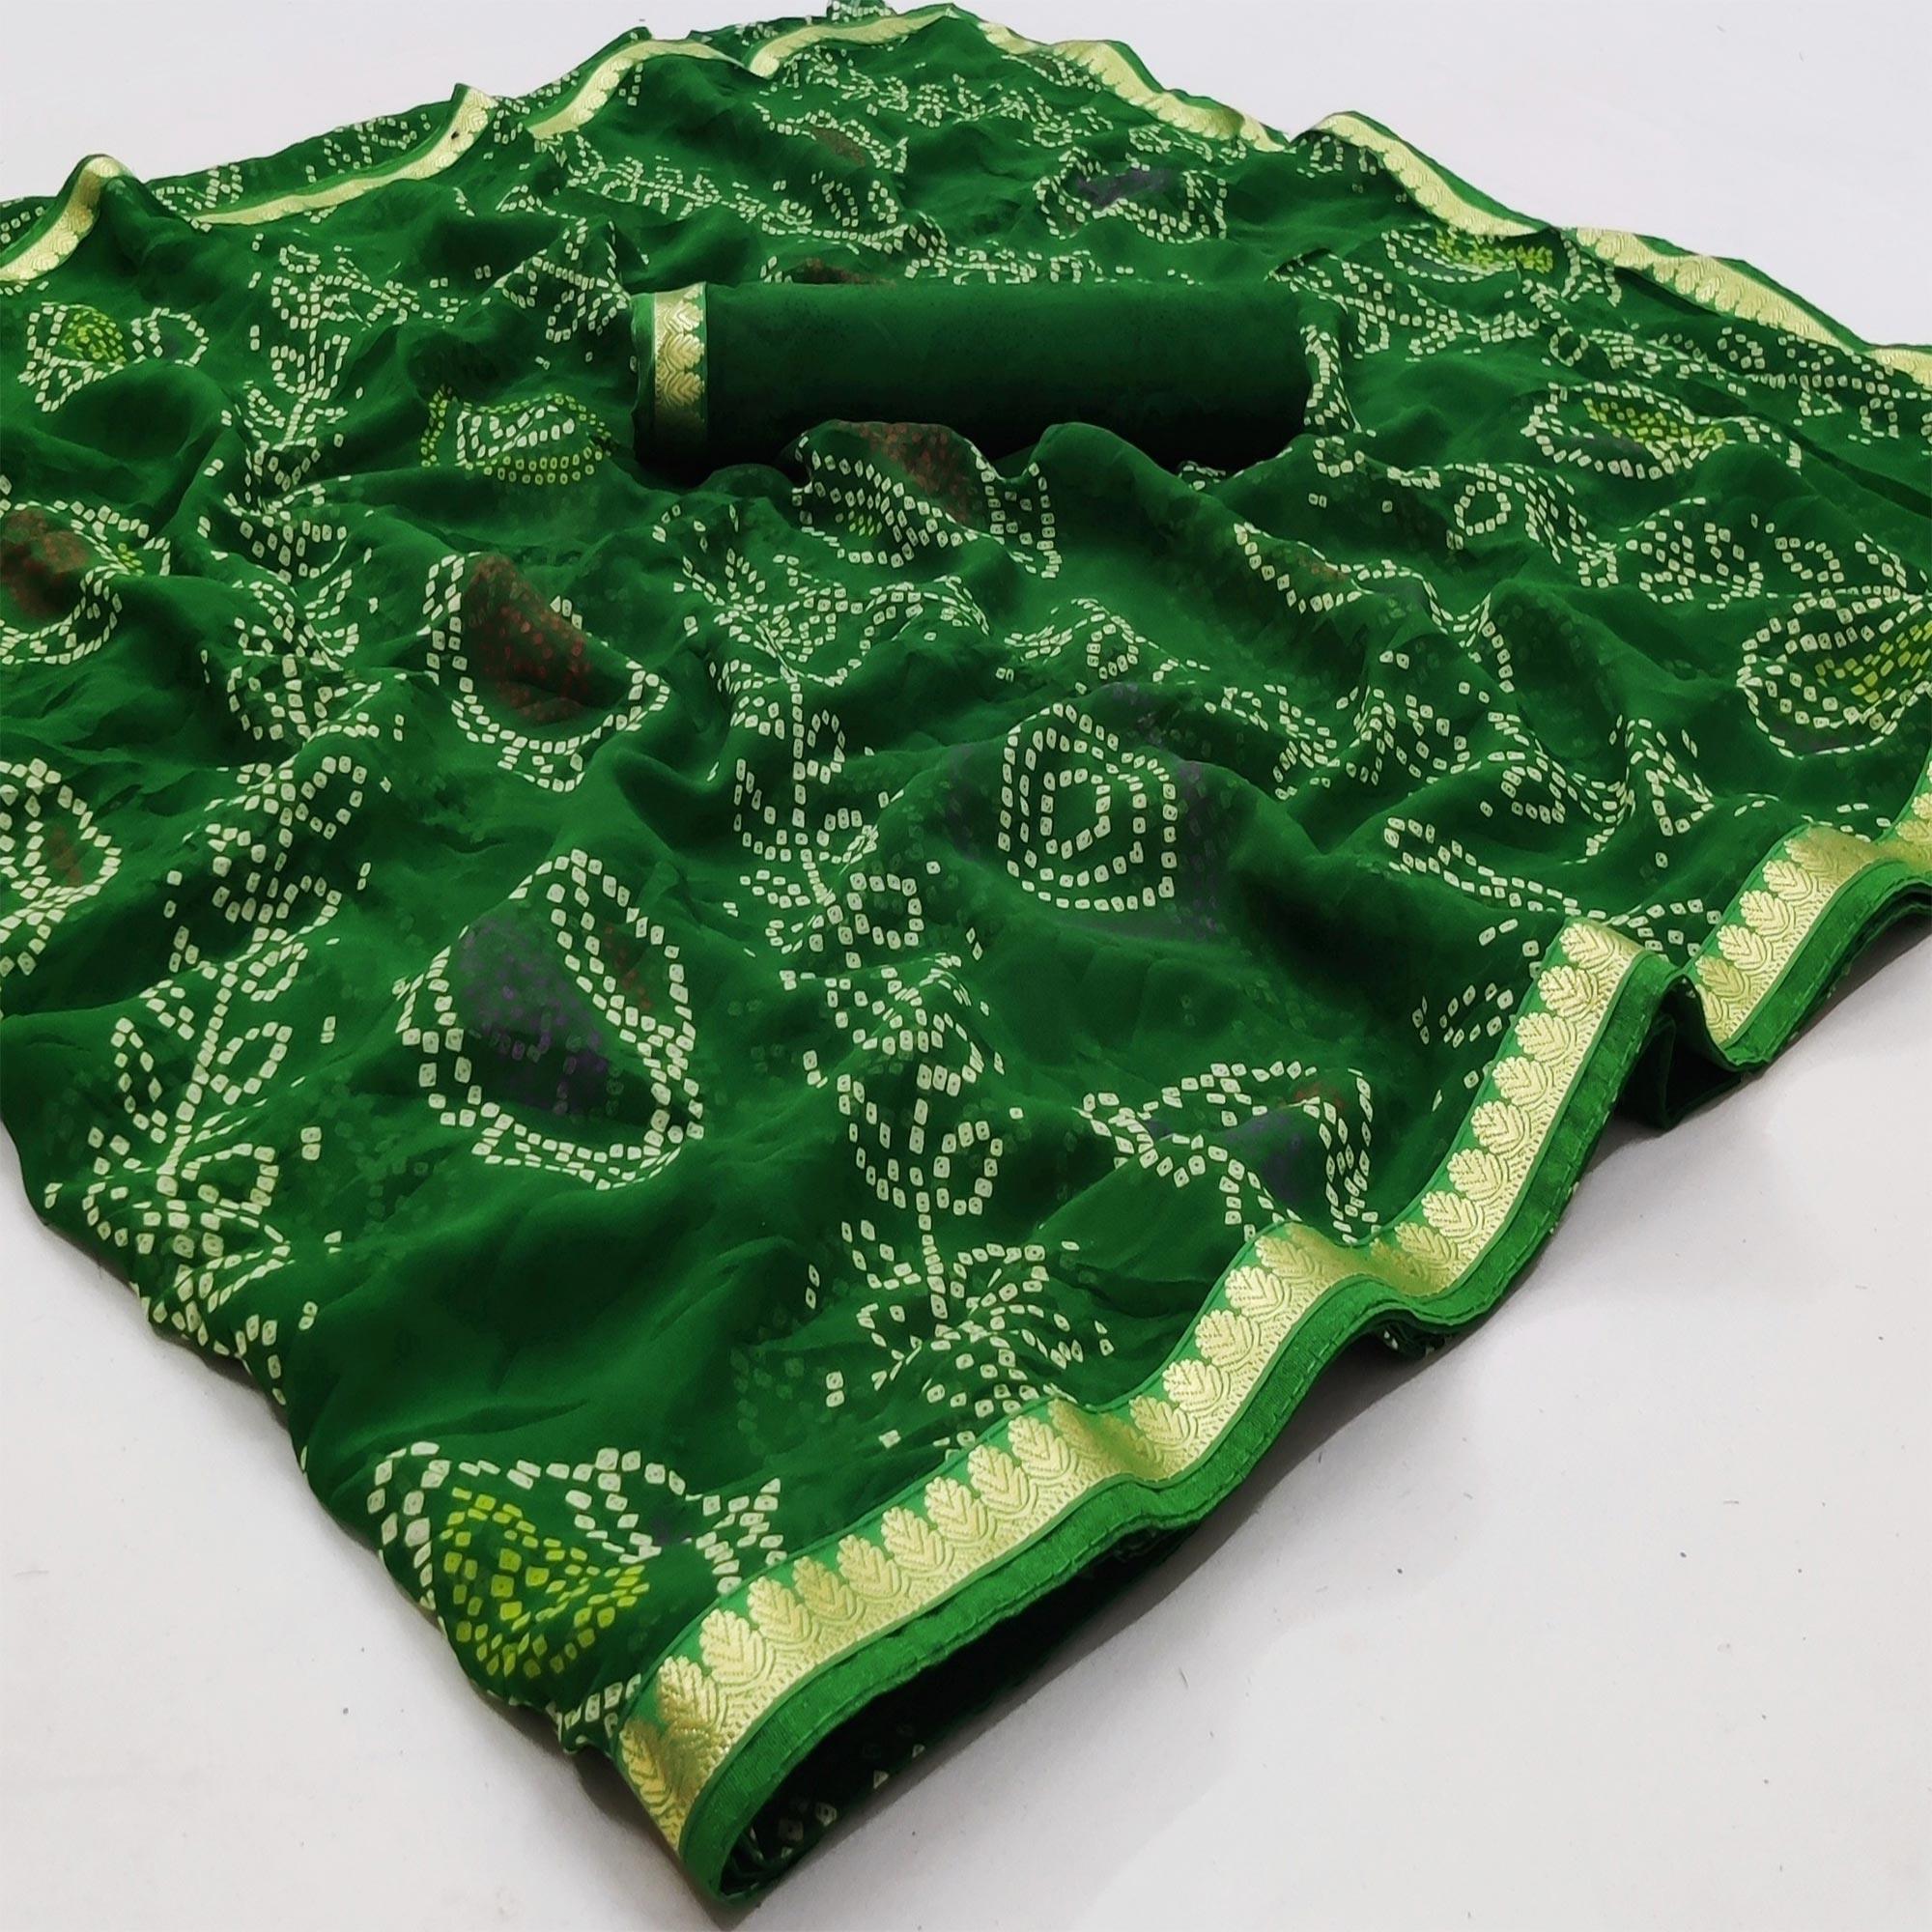 Green Casual Wear Bandhani Printed Soft Georgette Saree With Fancy Border - Peachmode